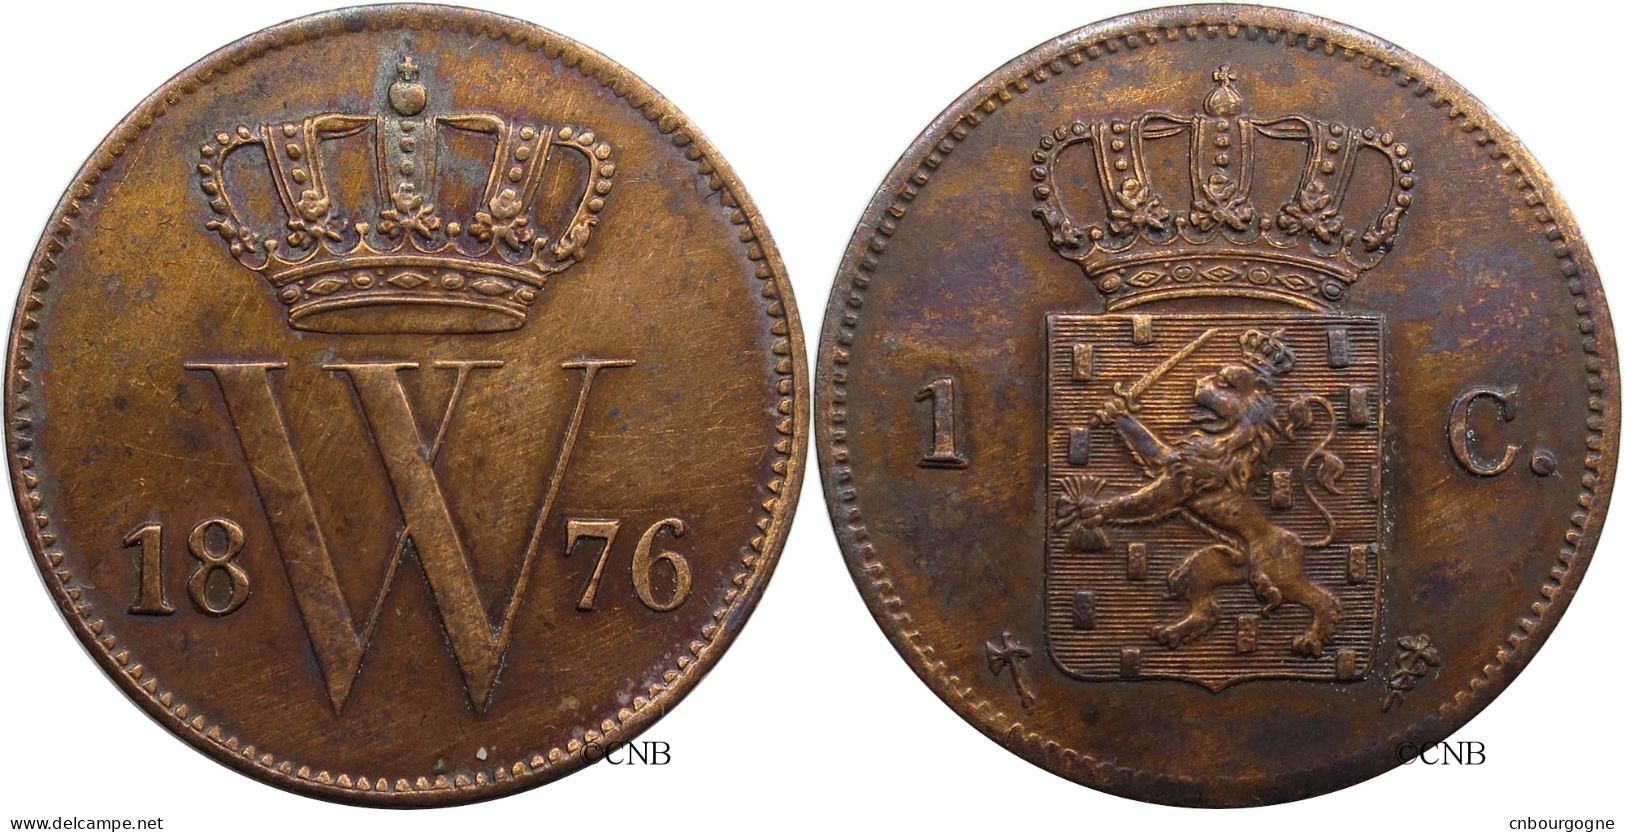 Pays-Bas - Royaume - Guillaume III - 1 Cent 1876 - TTB+/AU50 - Mon4043 - 1849-1890: Willem III.